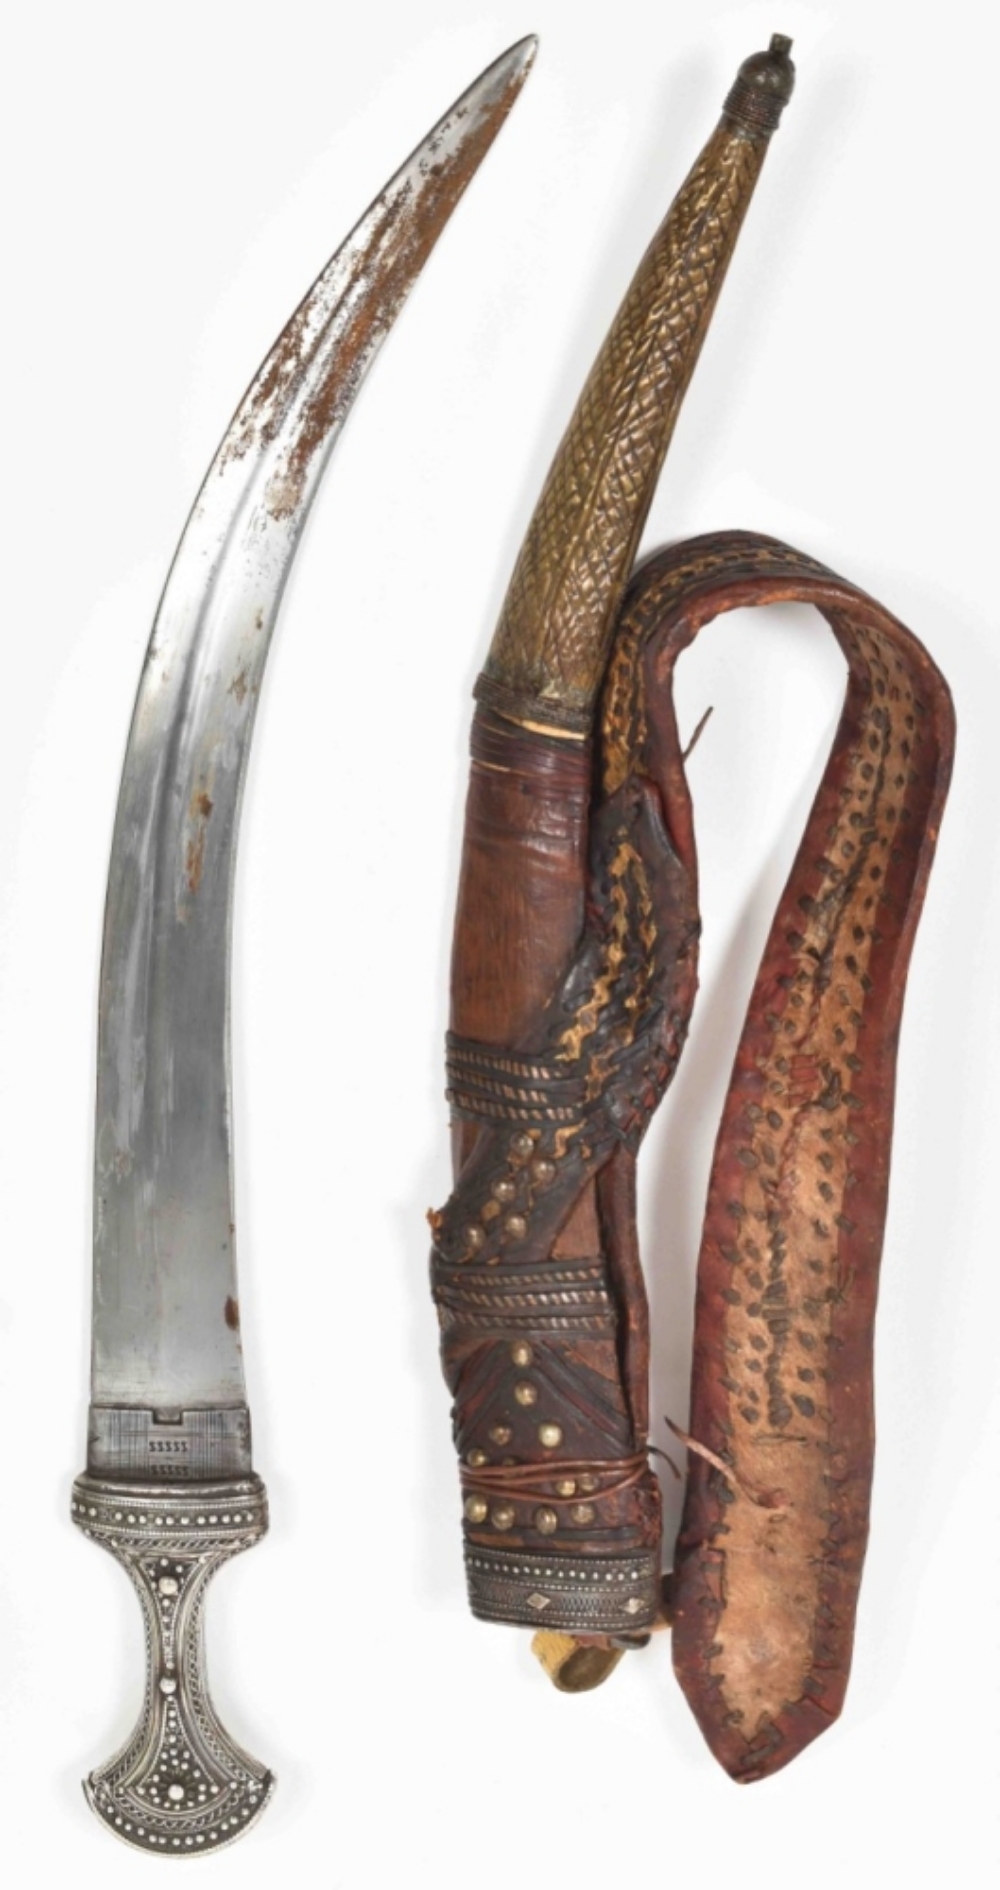 Early 20th cent. Ottoman sword